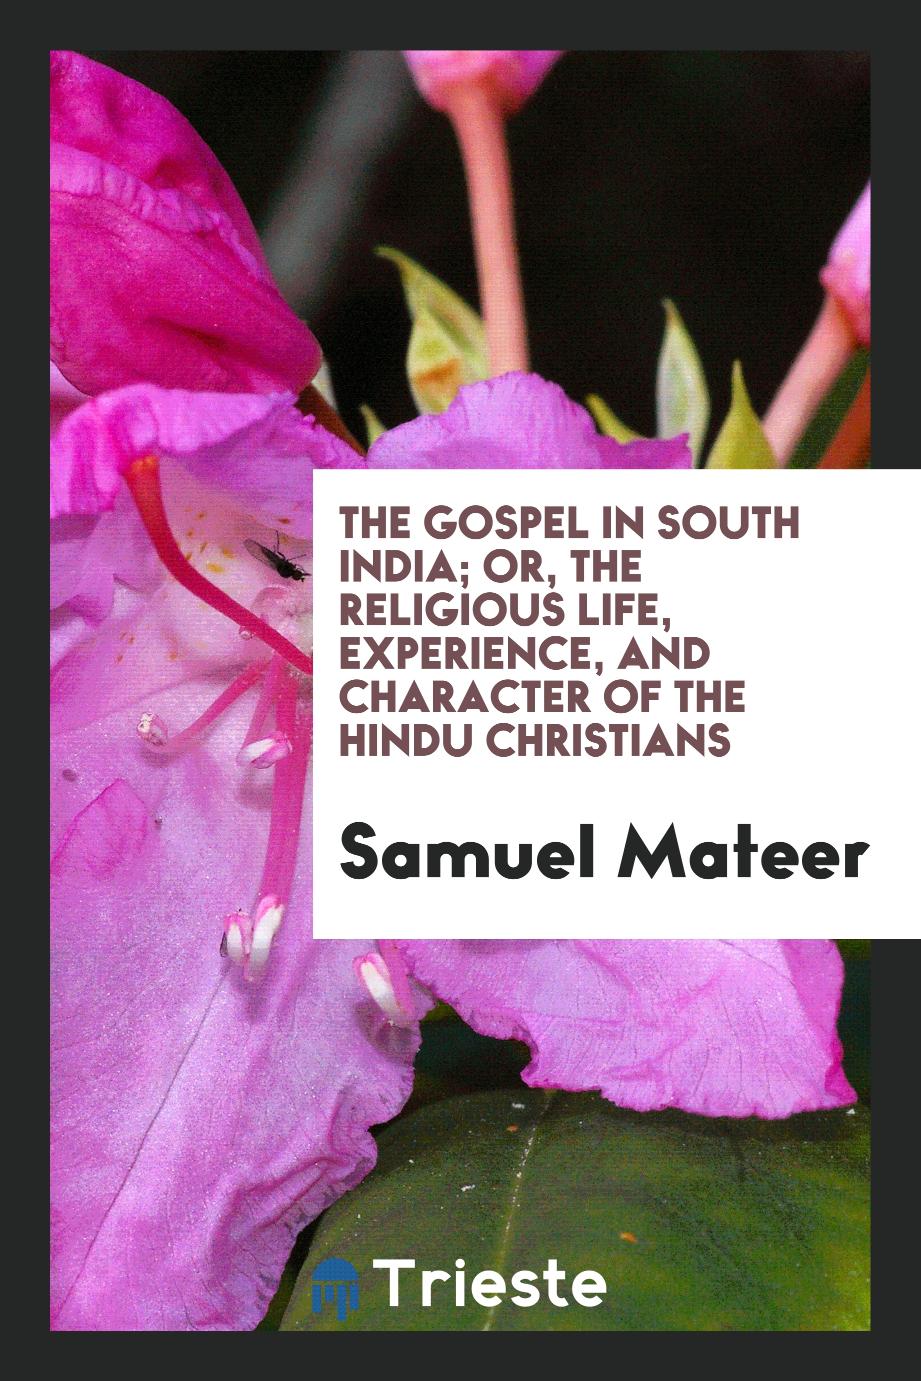 The gospel in South India; or, the religious life, experience, and character of the Hindu Christians